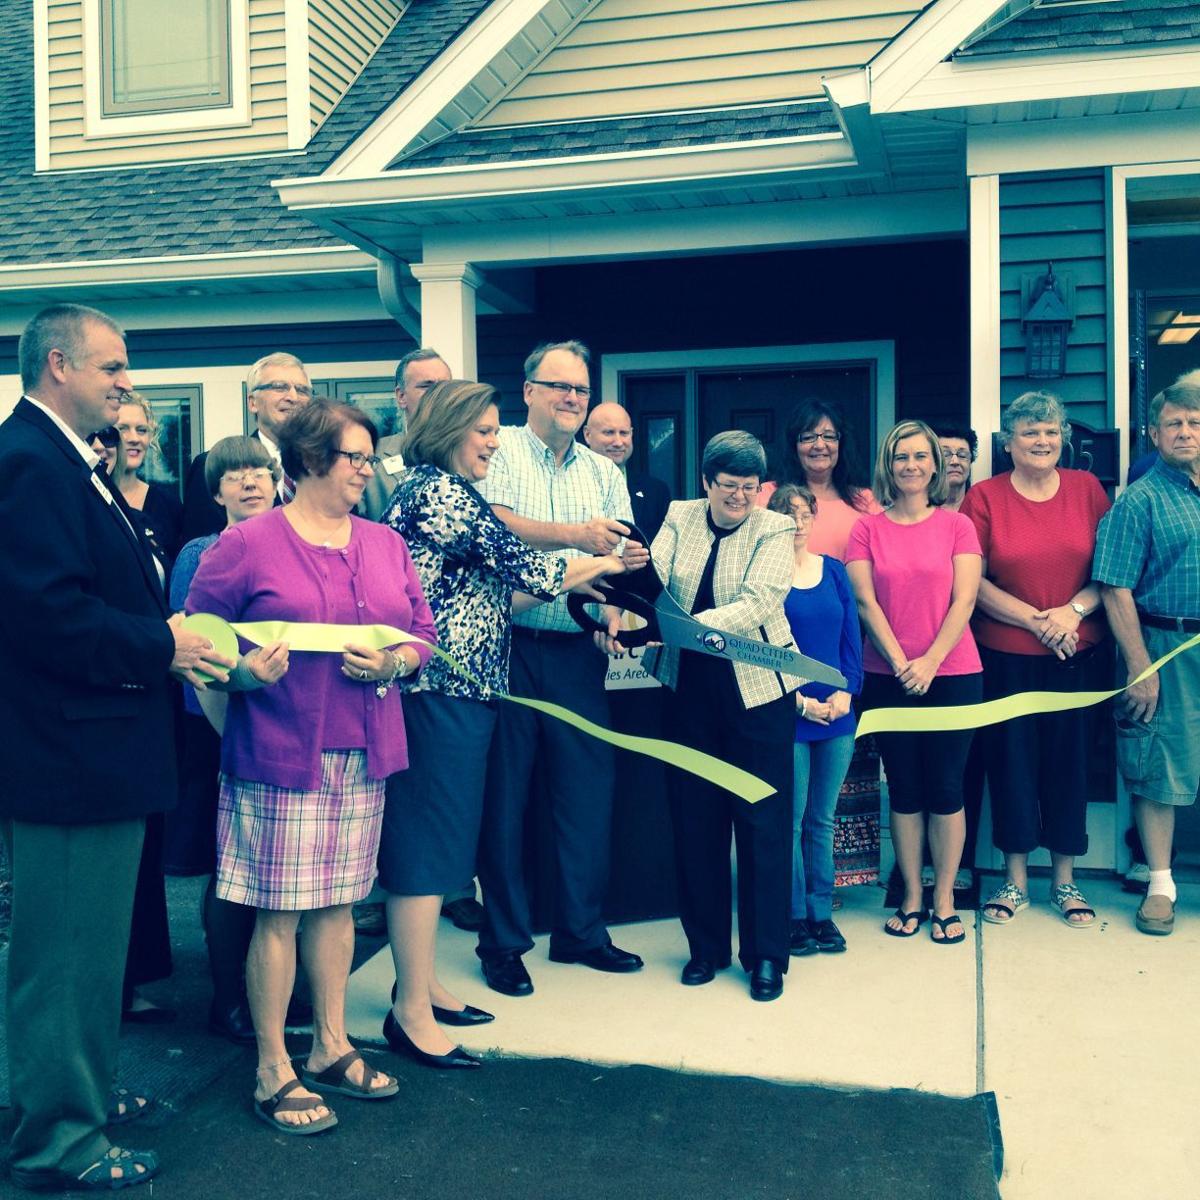 ARC Senior Care officially opens with a festive ribbon cutting